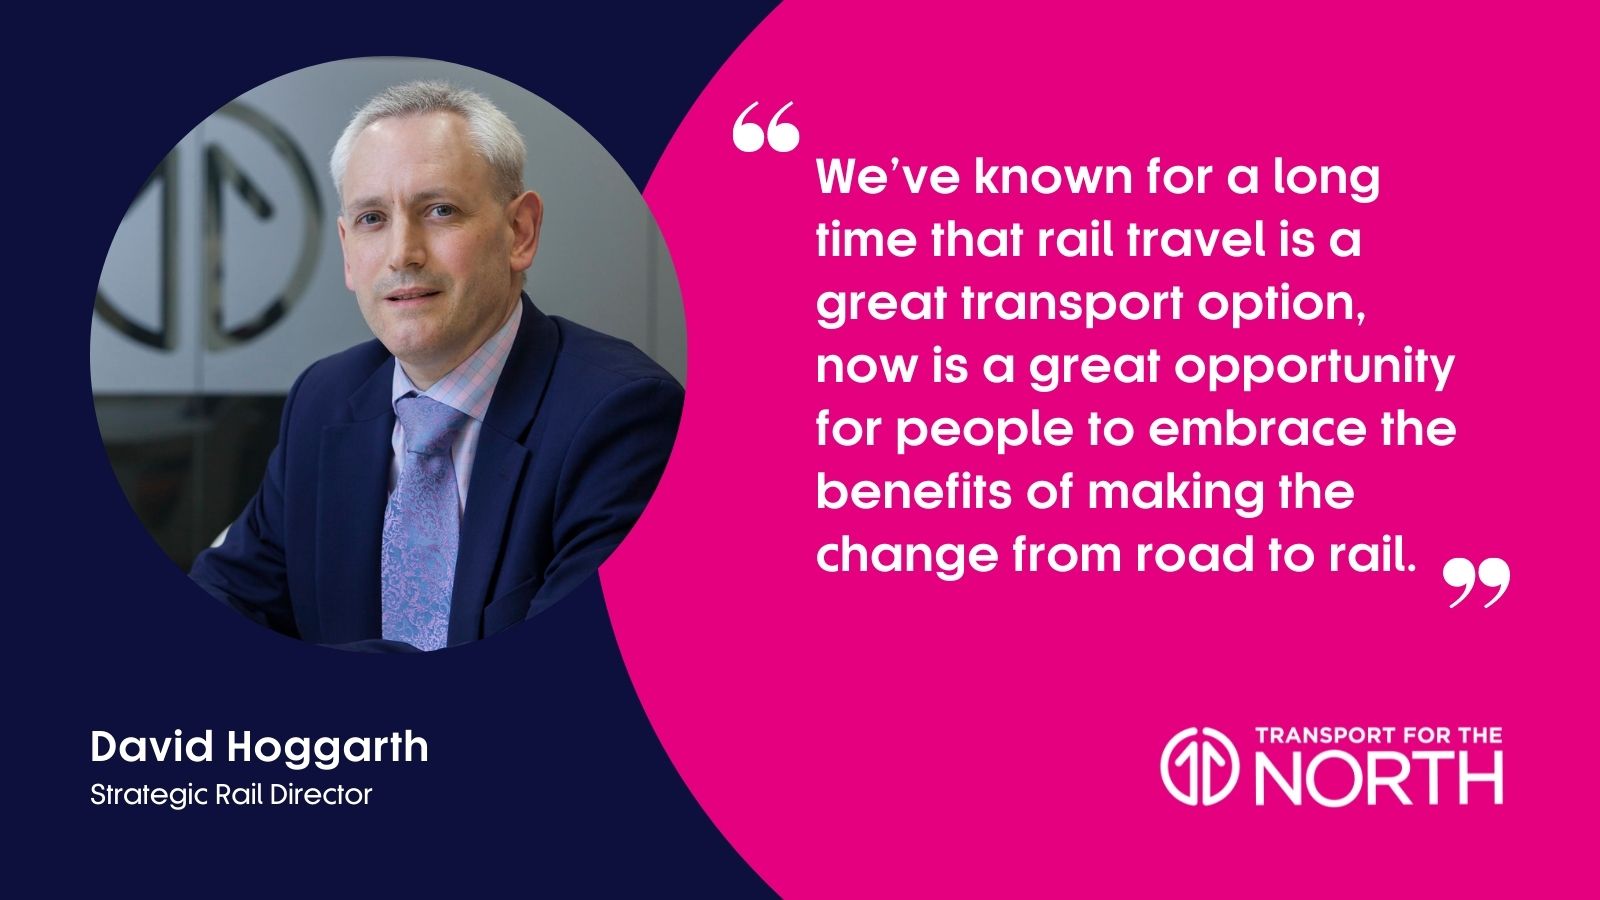 David Hoggarth, Strategic Rail Director at Transport for the North, is urging people to take a fresh look at the train.